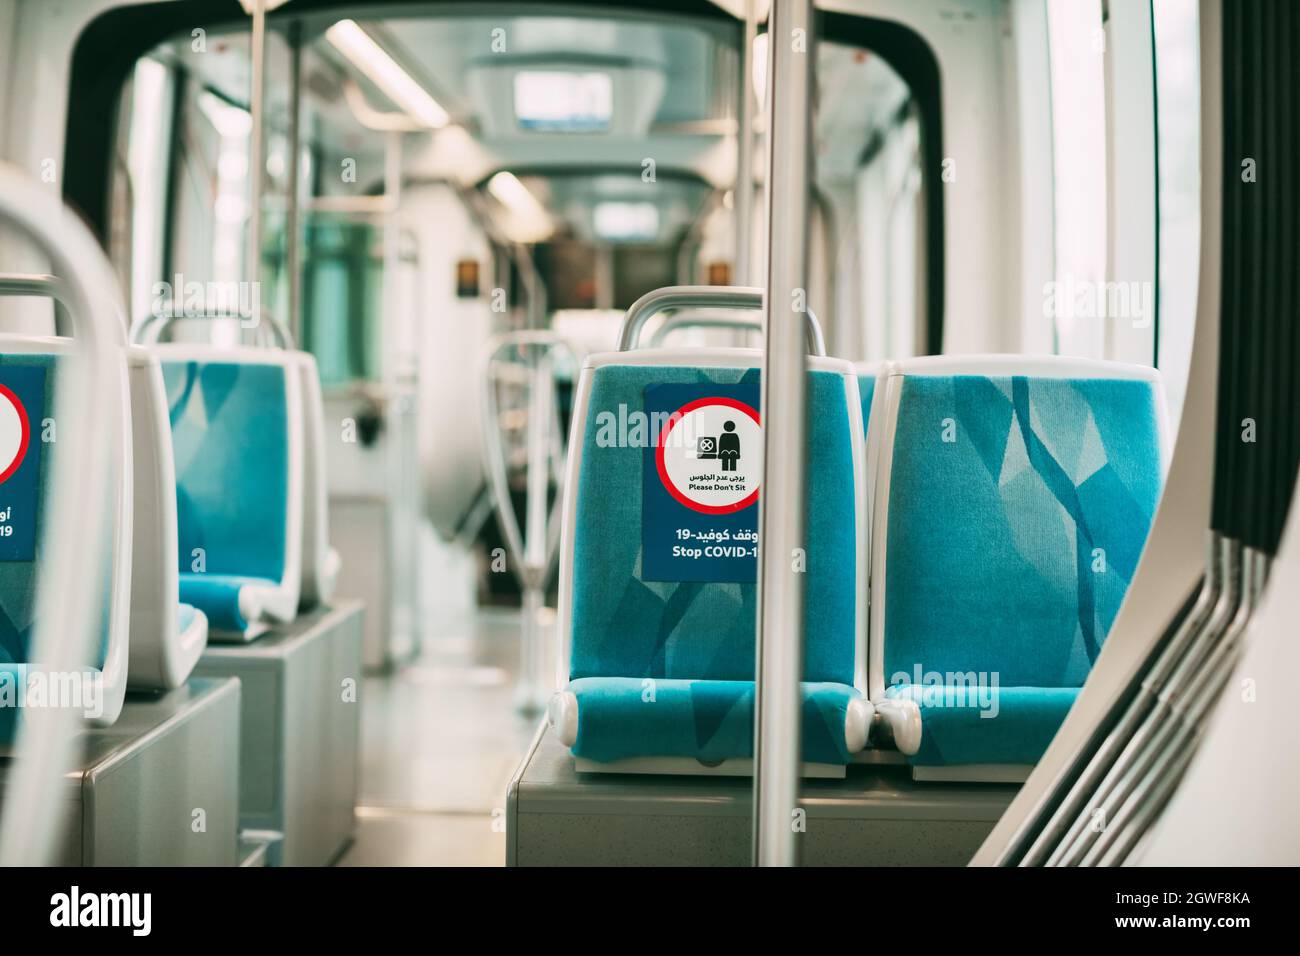 Dubai, Uae, November 2020 Bus With Seat Restriction Signs Due To The Covid-19 Coronavirus Pandemic. Stock Photo